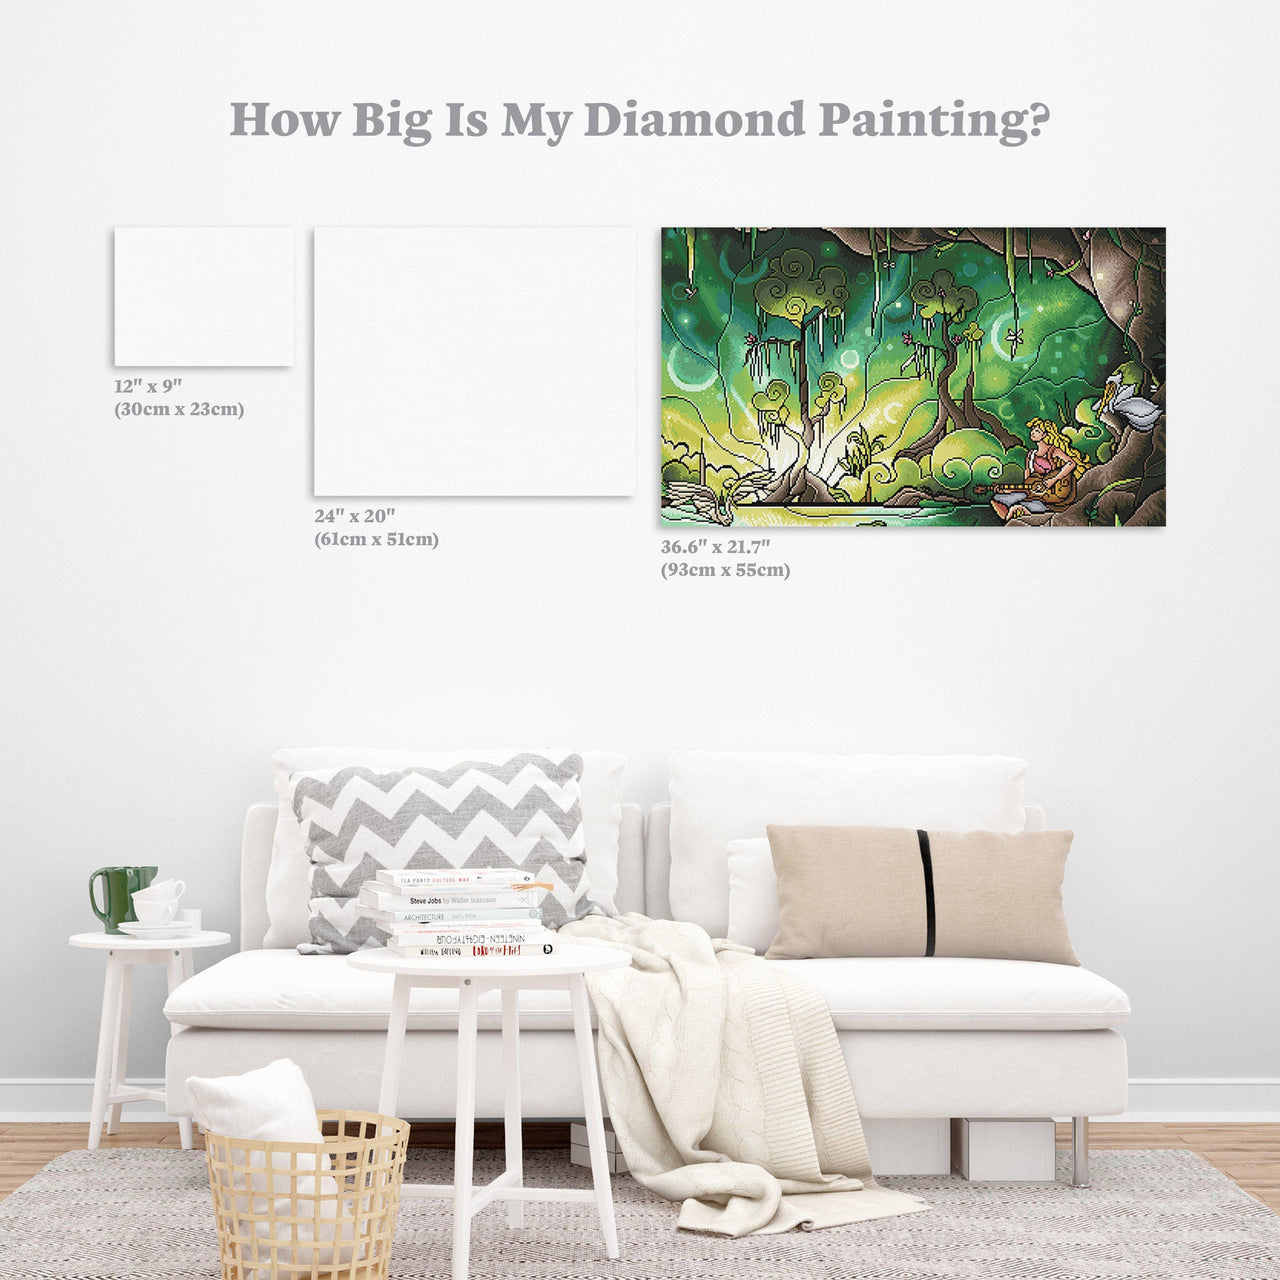 Diamond Painting Enchanted 21.7″ x 36.6″ (55cm x 93cm) / Round With 45 Colors Including 1 AB / 64,155